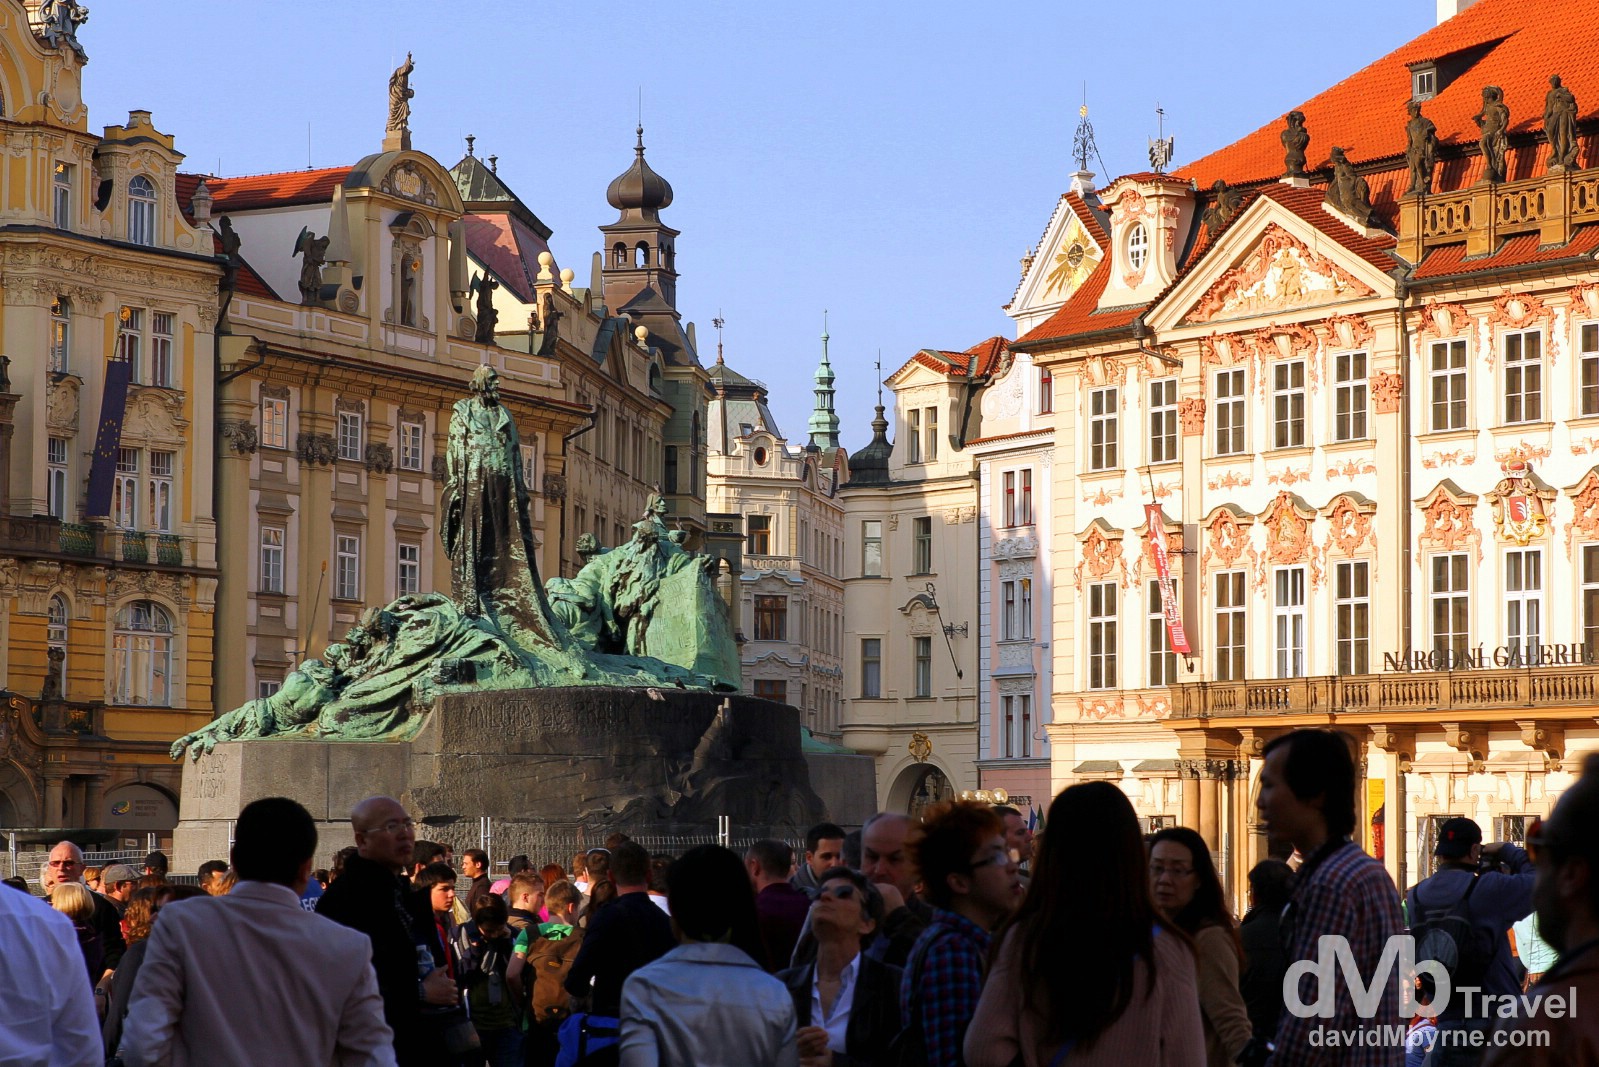 The Jan Hus statue, & loads of people, in Old Town Square, Prague, Czech Republic. March 30th, 2014.